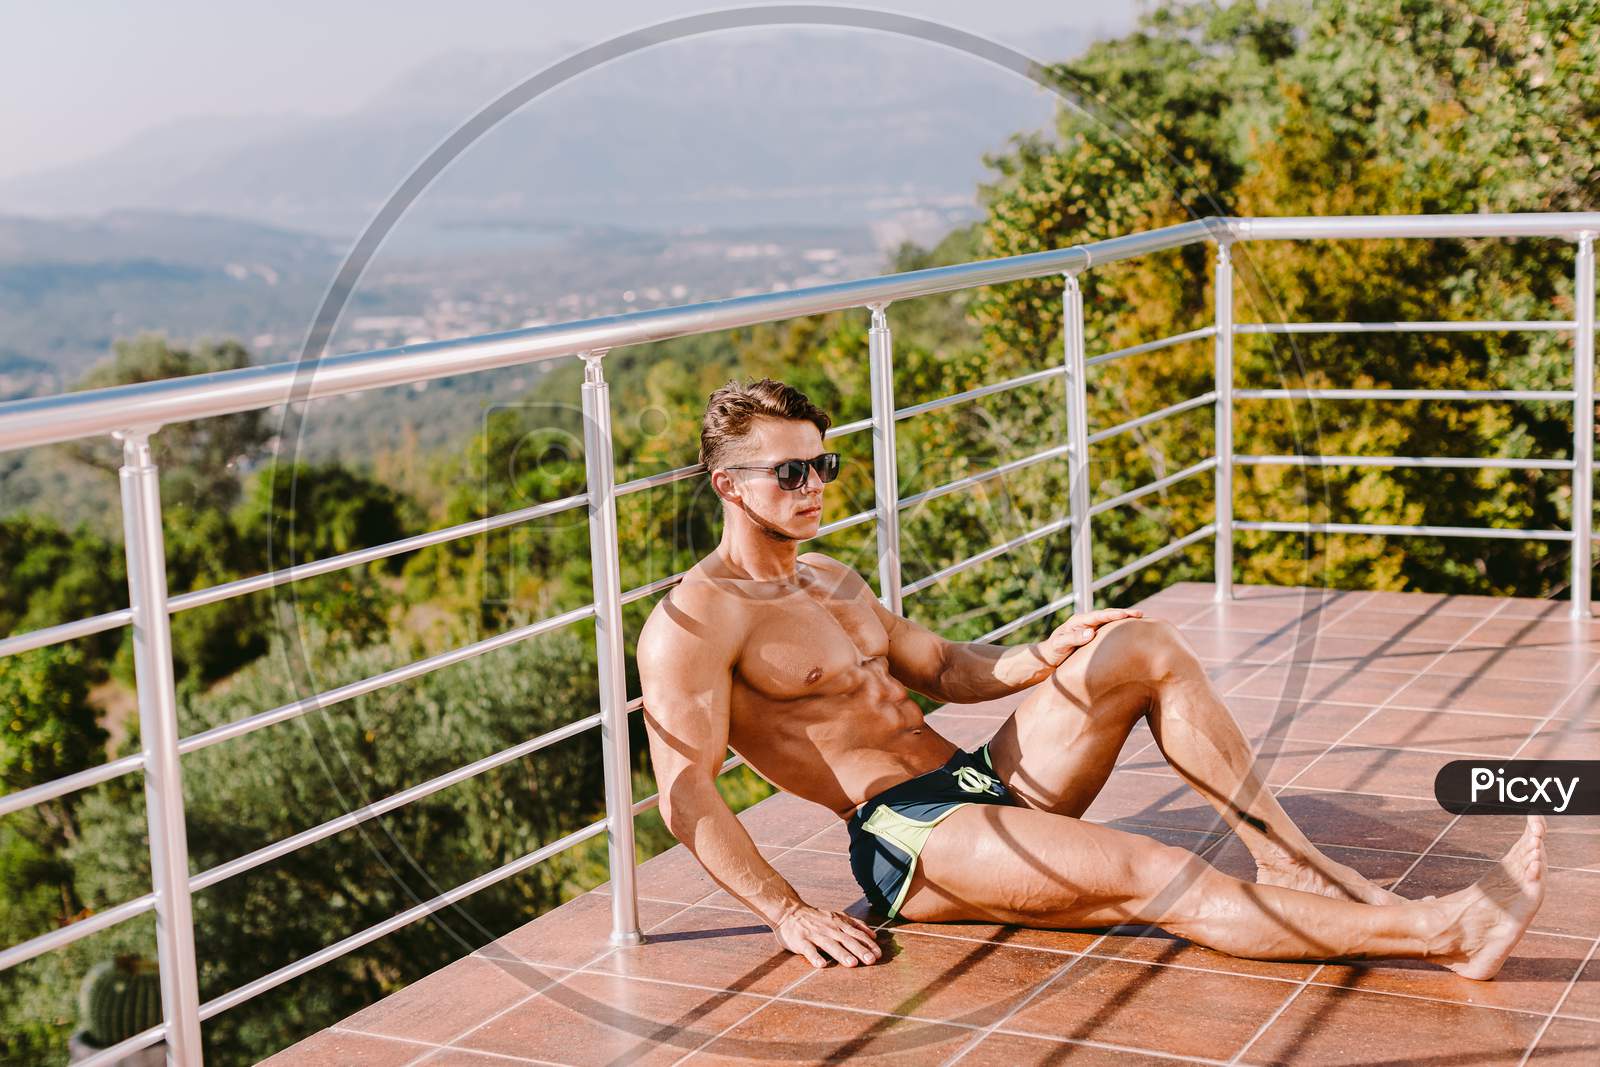 Fashion Portrait Of A Muscular Man Posing Shirtless In Swim Trunks And Sunglasses